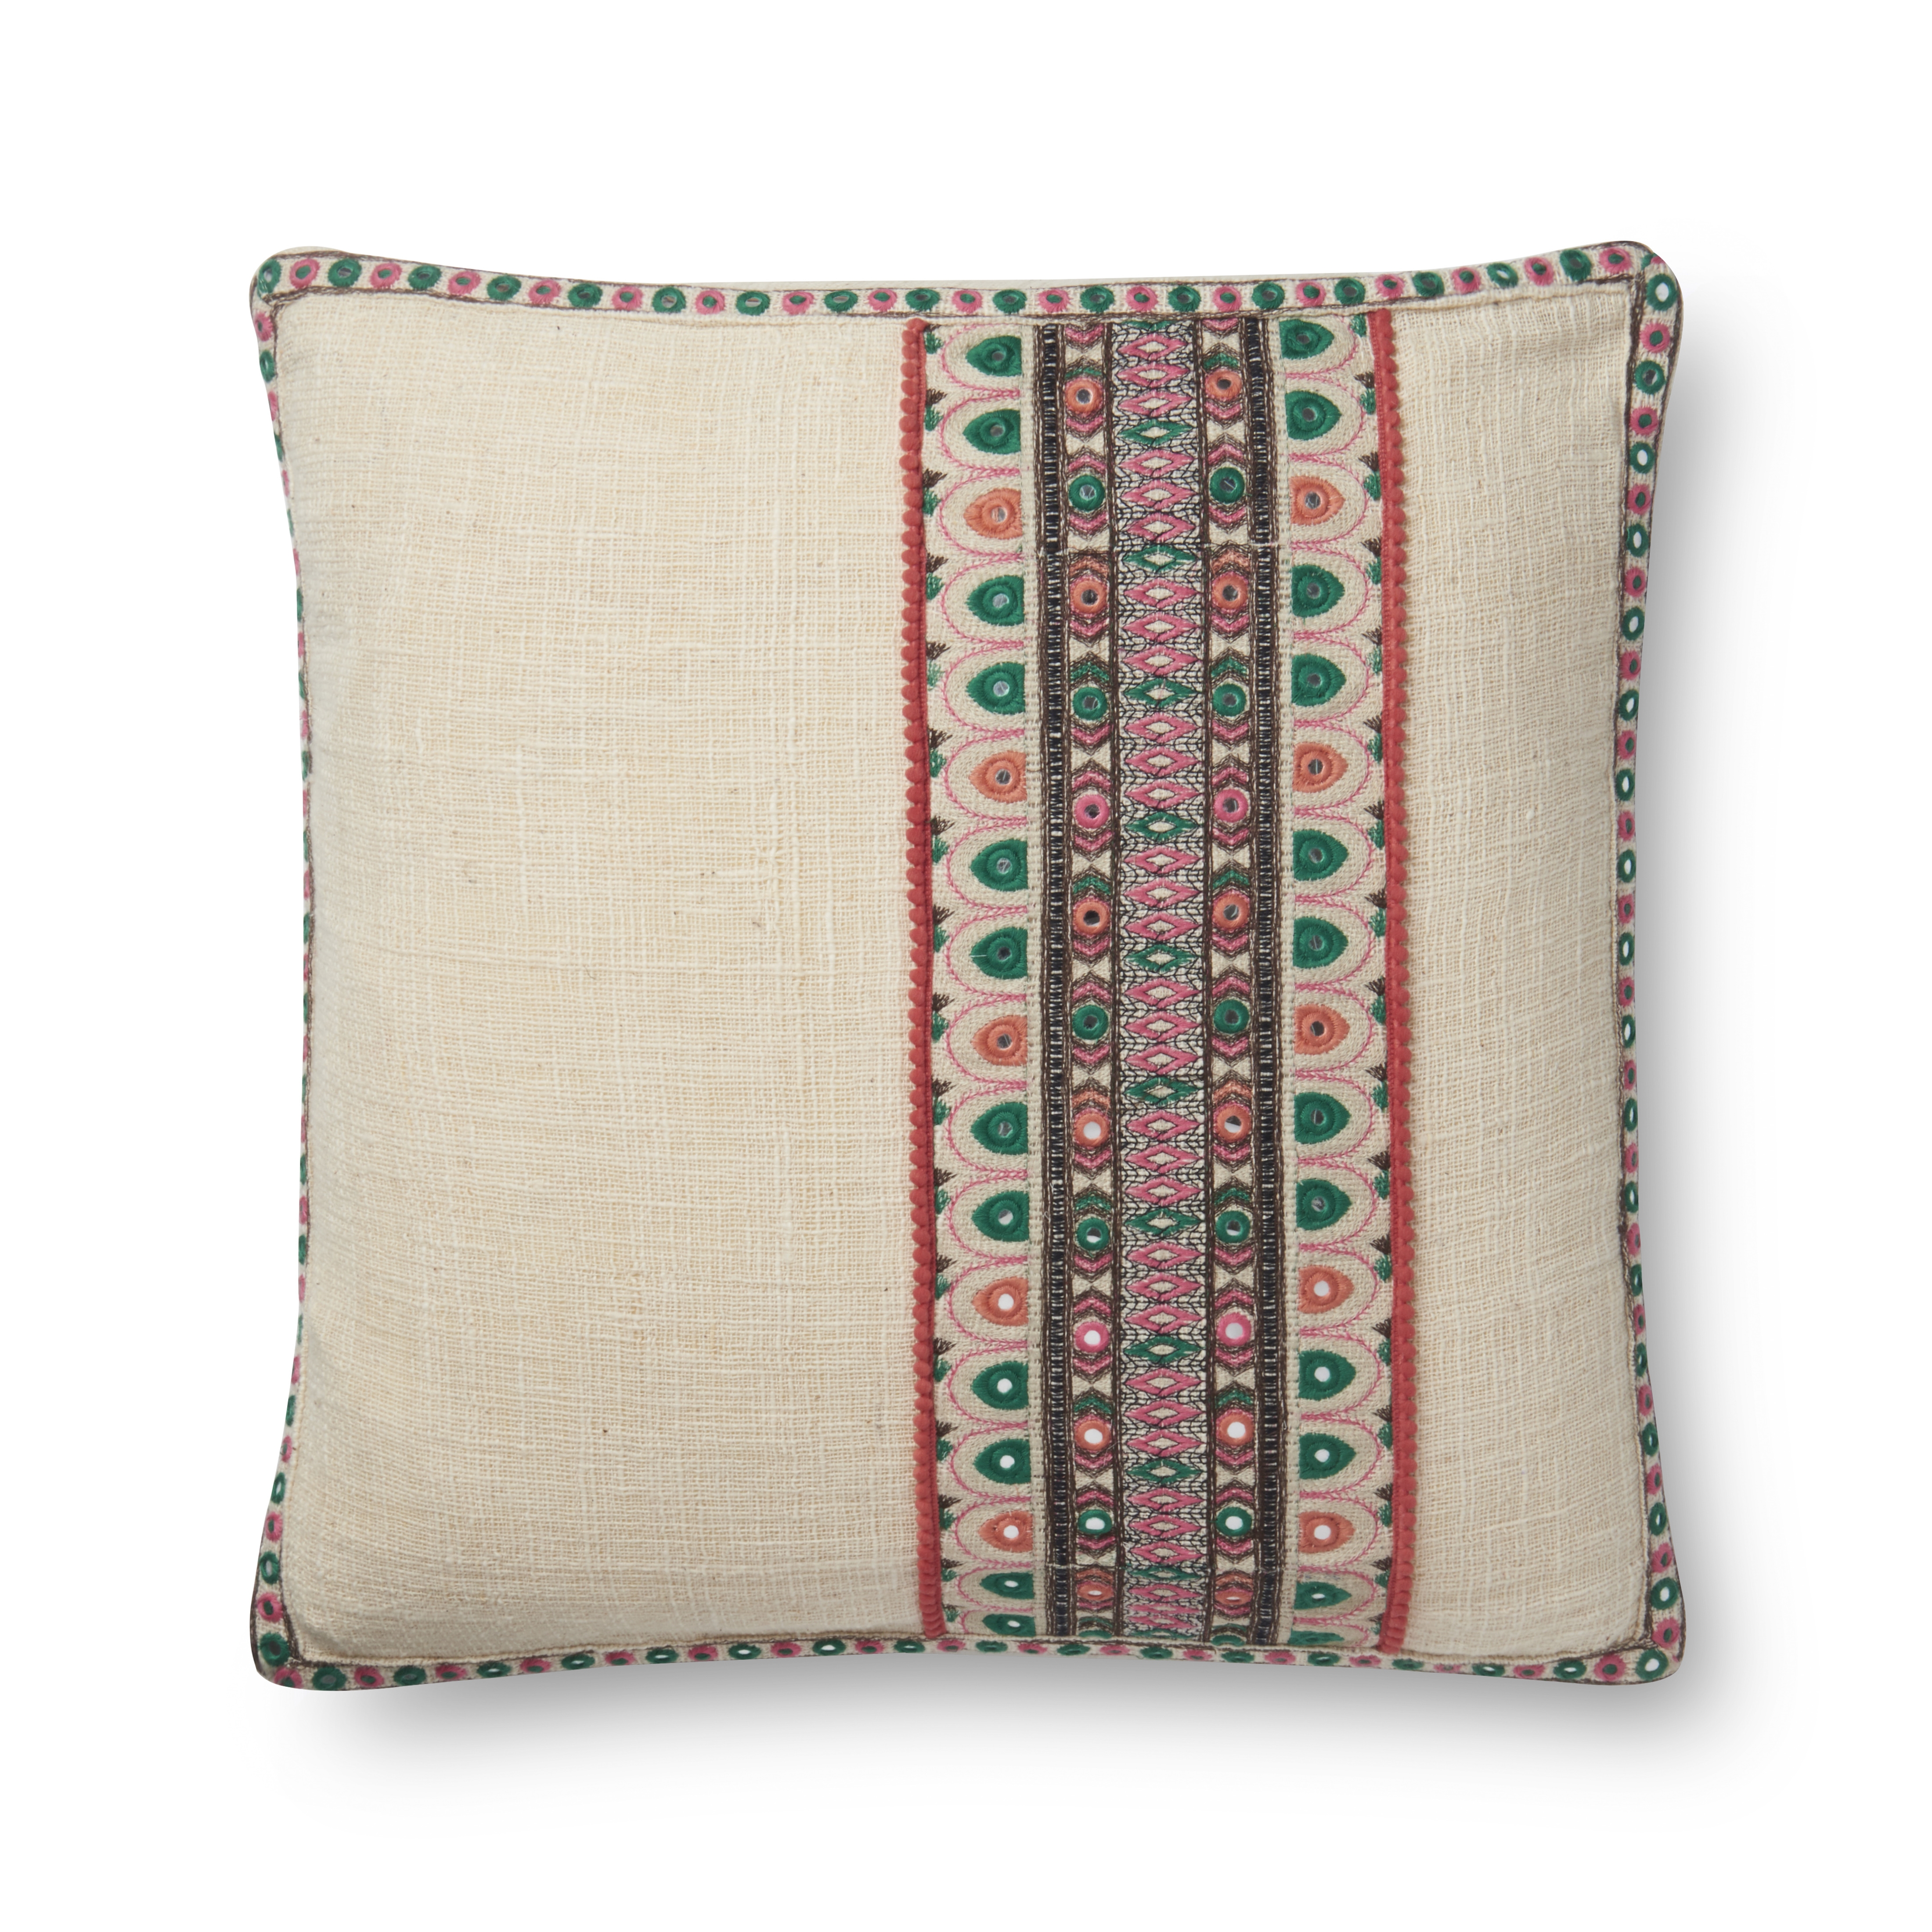 Justina Blakeney x Loloi Pillows P0634 Multi 13" x 35" Cover Only - Image 1